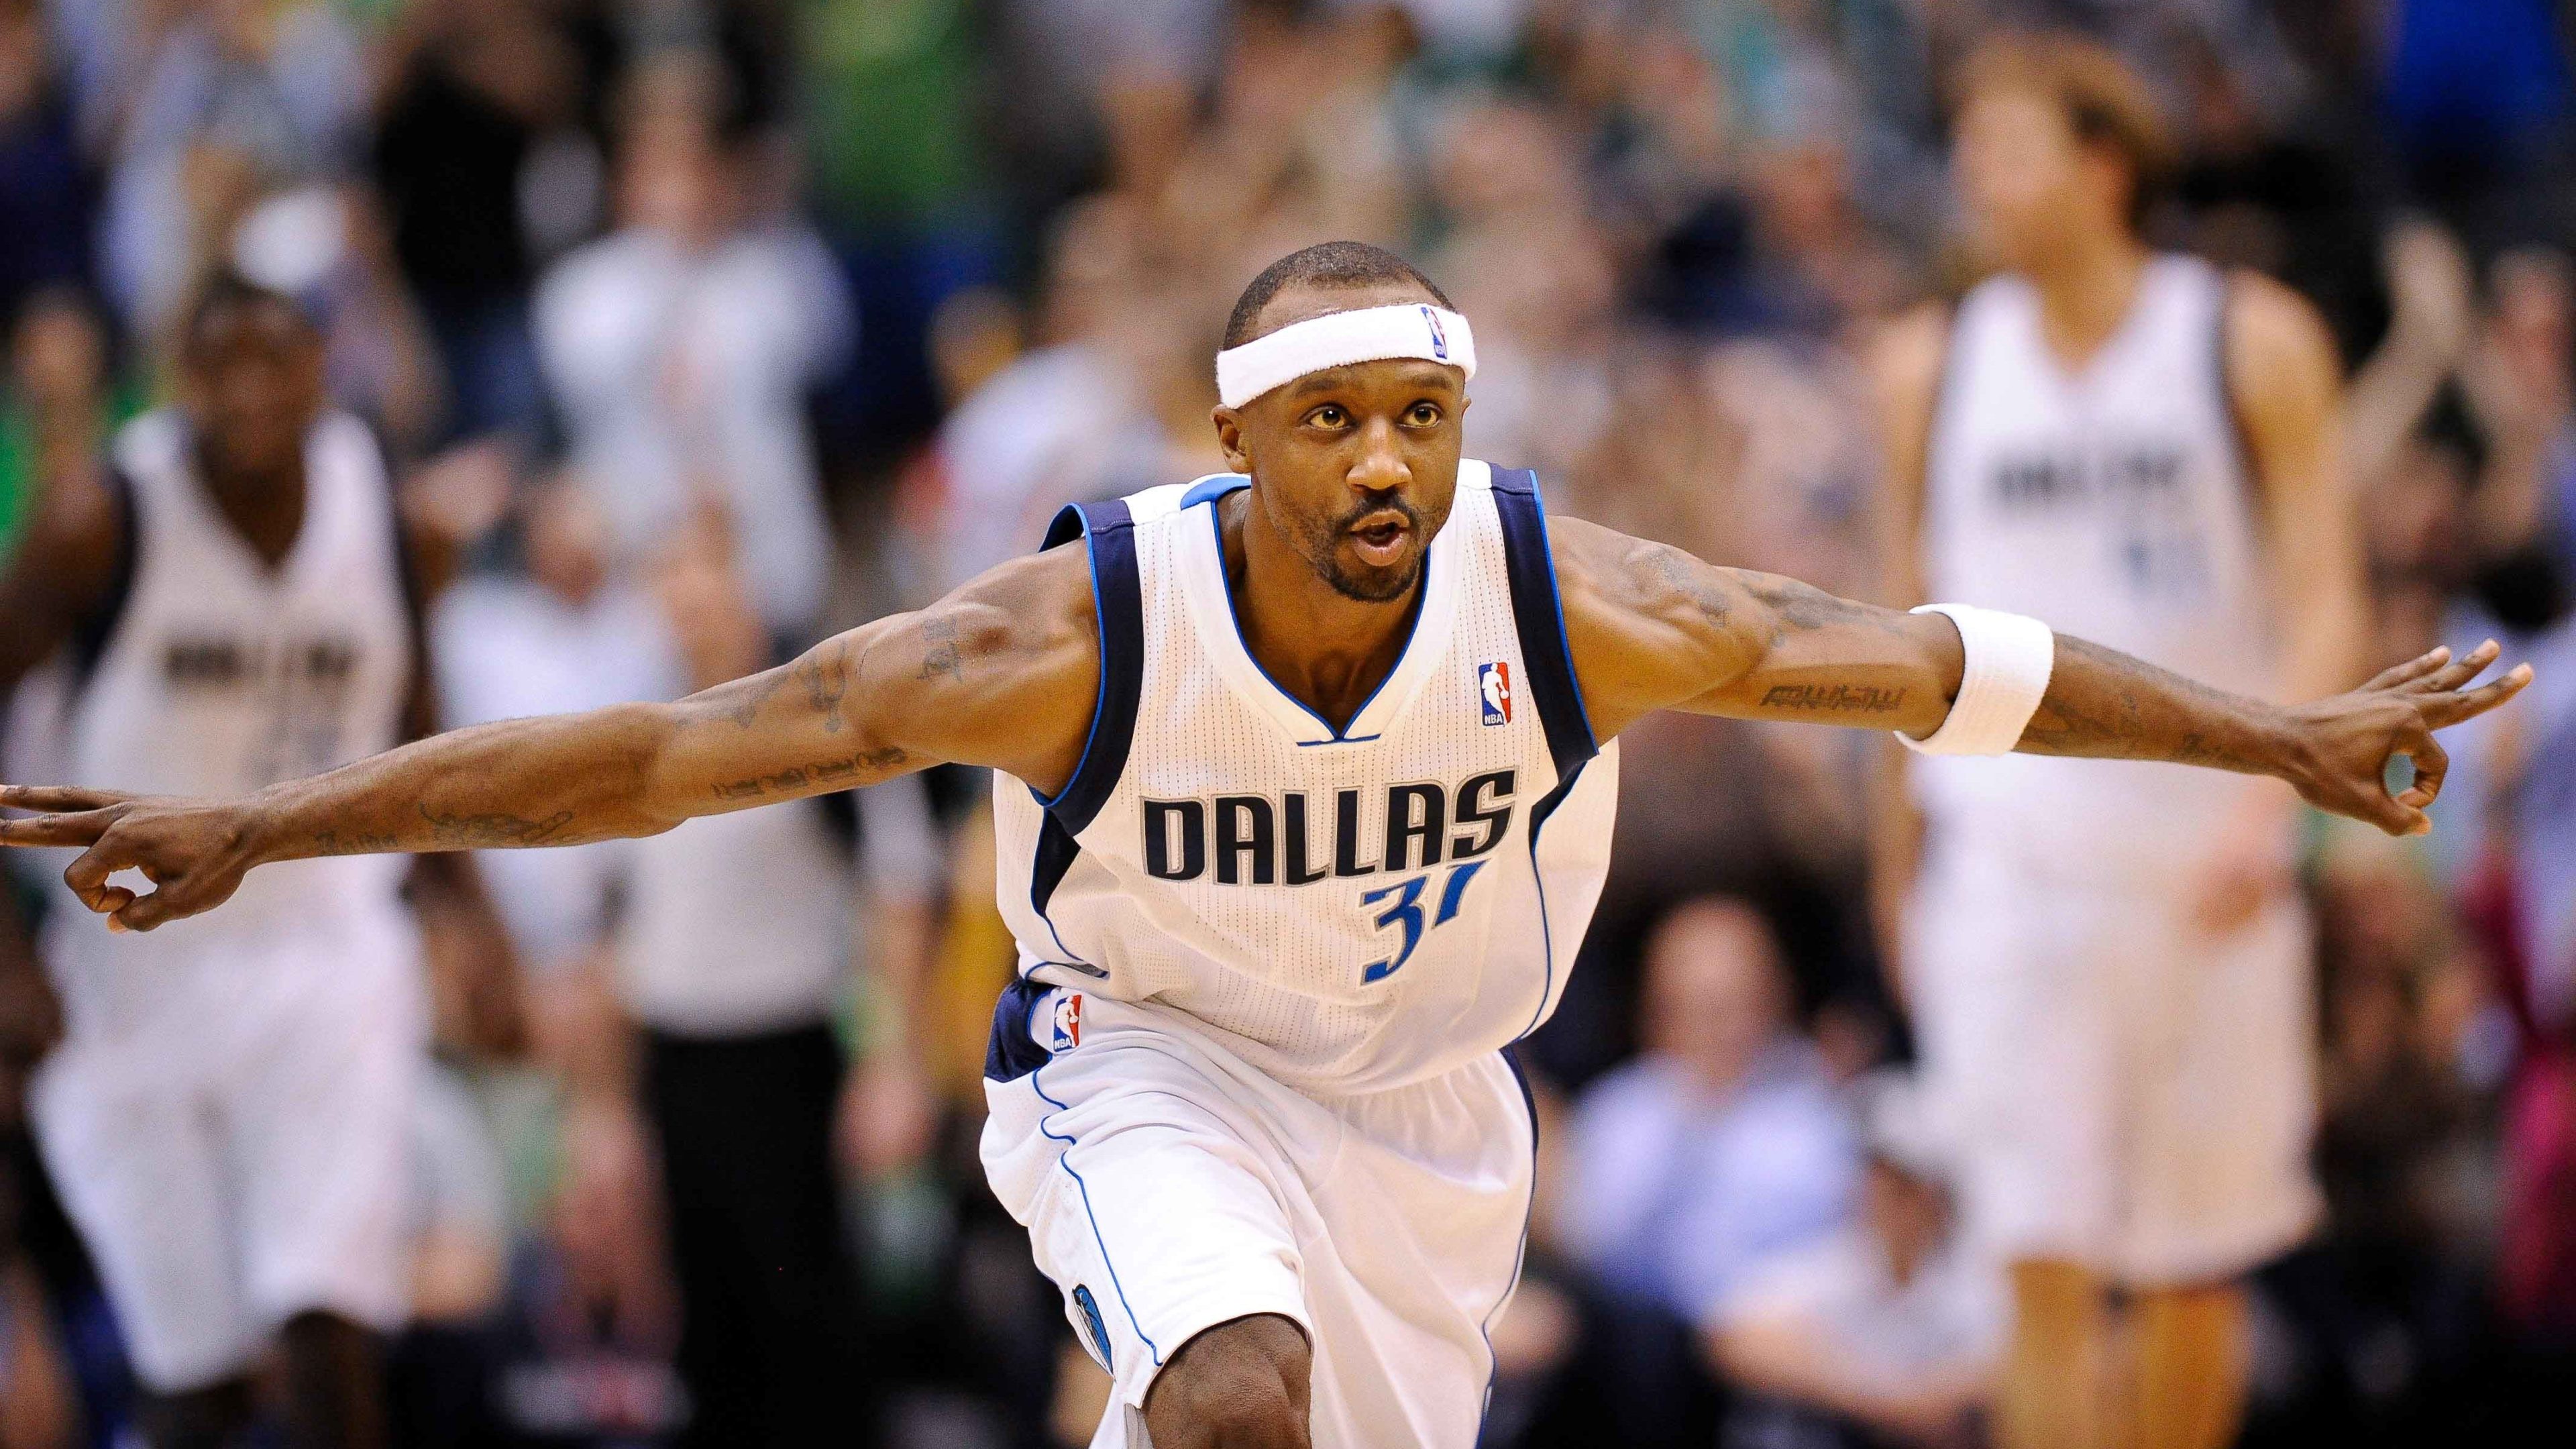 Jason Terry helped define the Sixth Man role in his early NBA